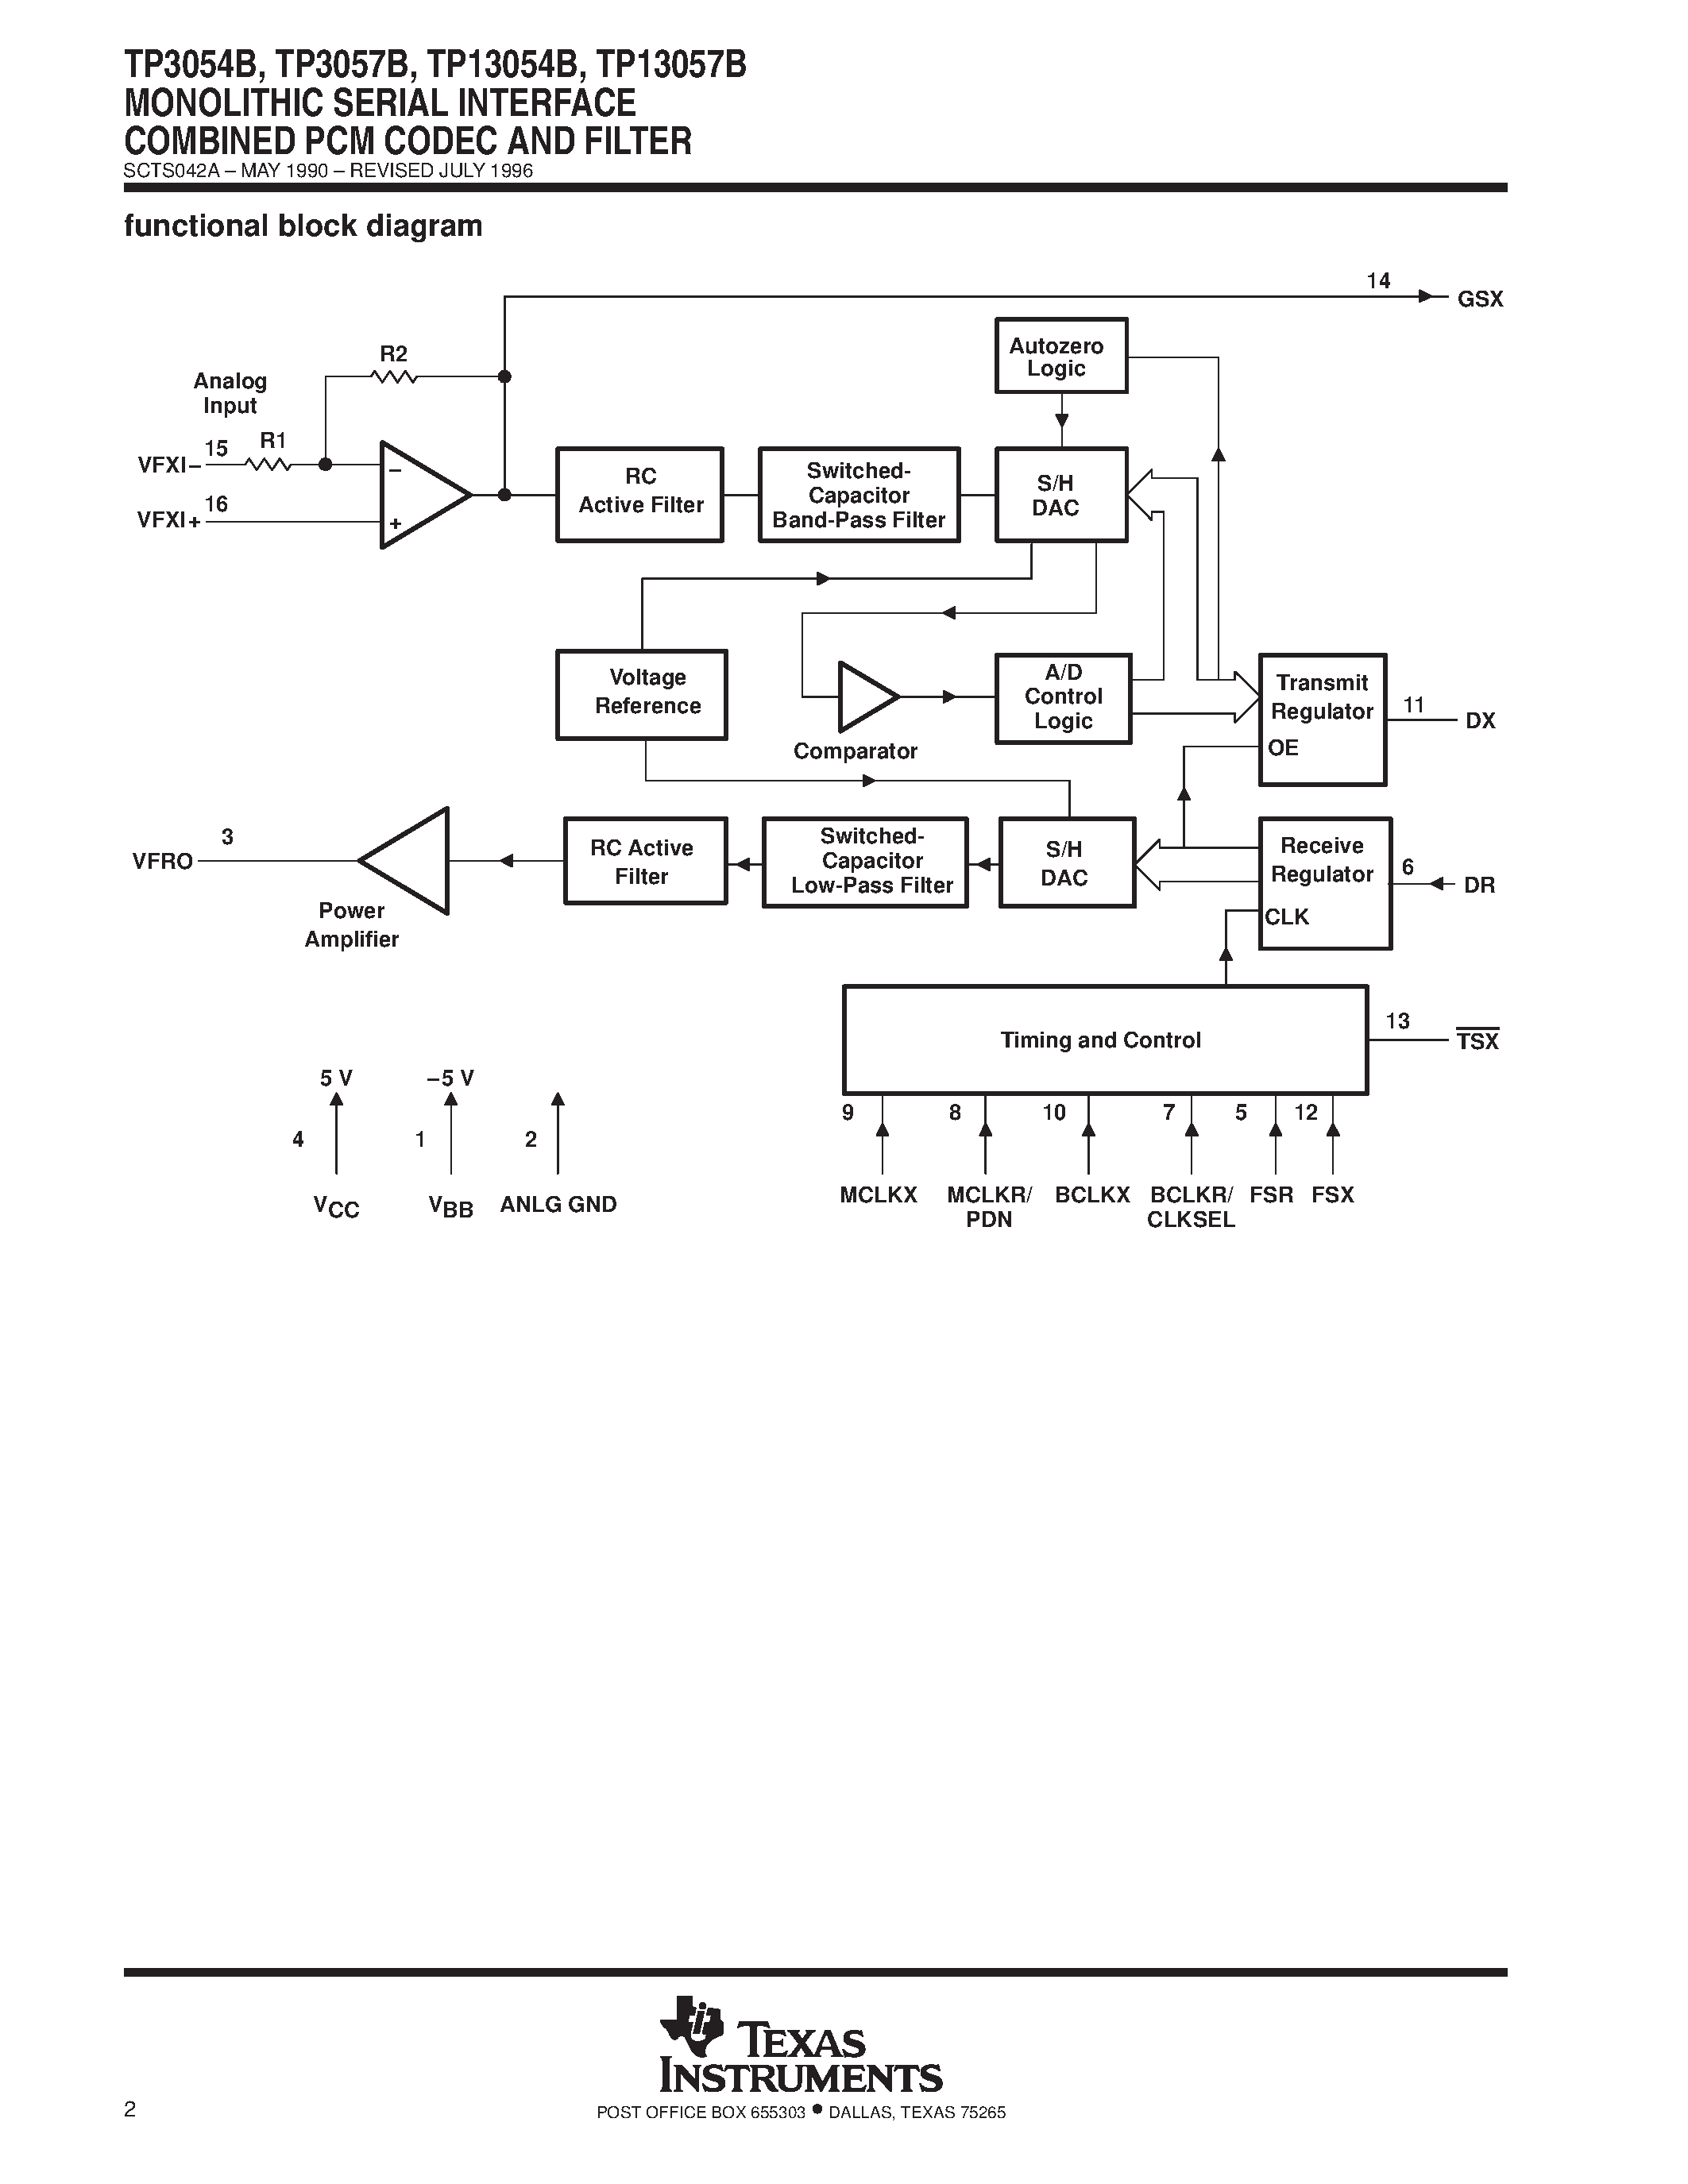 Datasheet TP13054BDW - MONOLITHIC SERIAL INTERFACE COMBINED PCM CODEC AND FILTER page 2